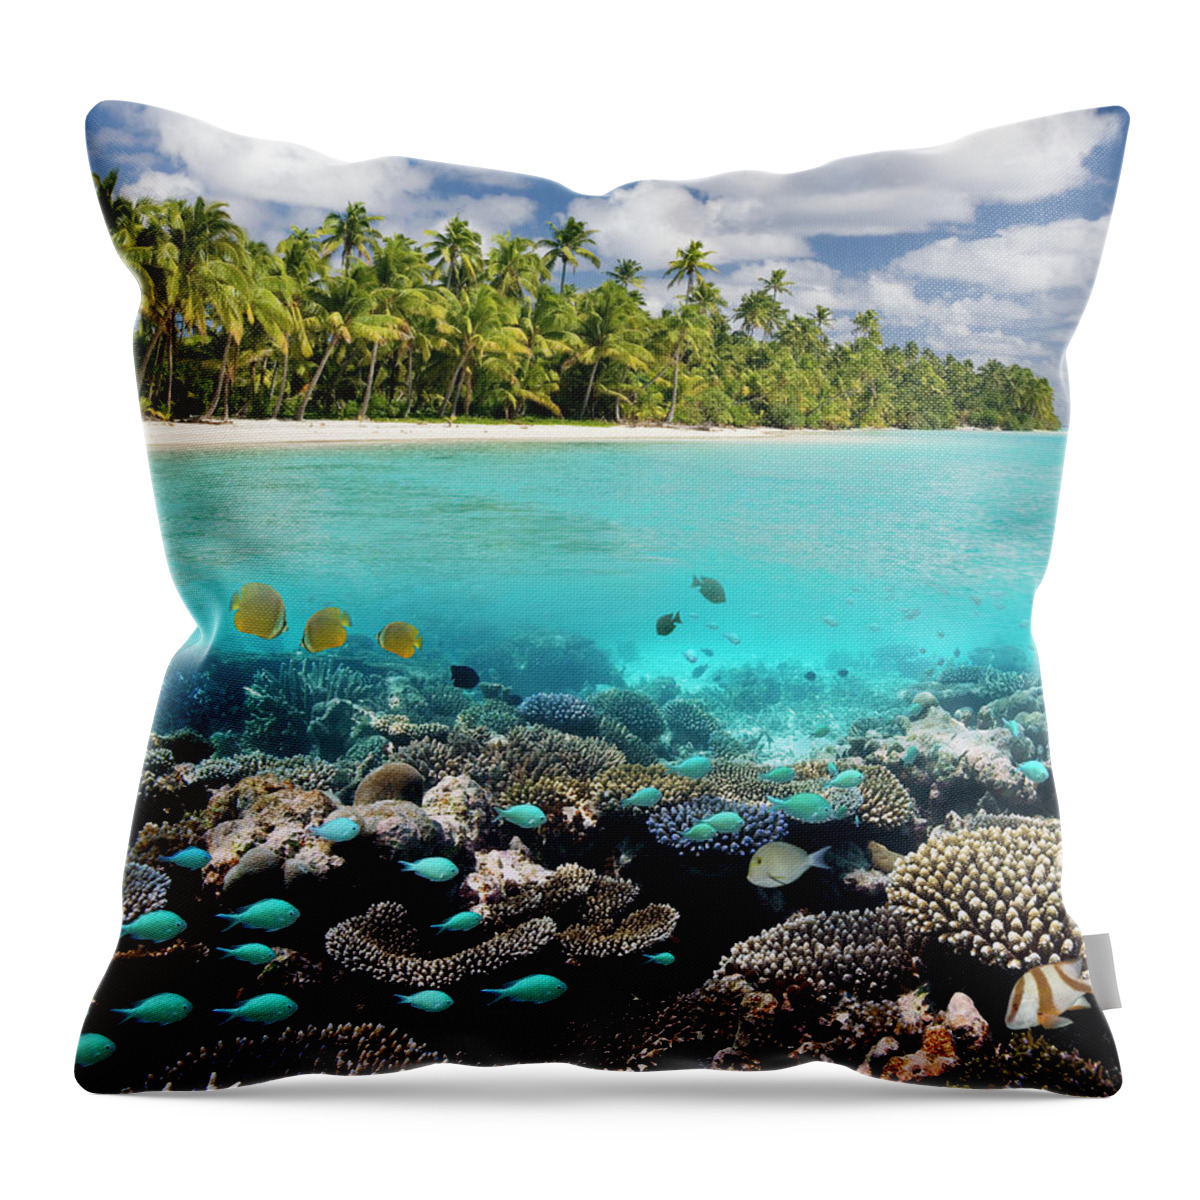 Underwater Throw Pillow featuring the photograph Tropical Paradise - The Maldives by Steve Allen